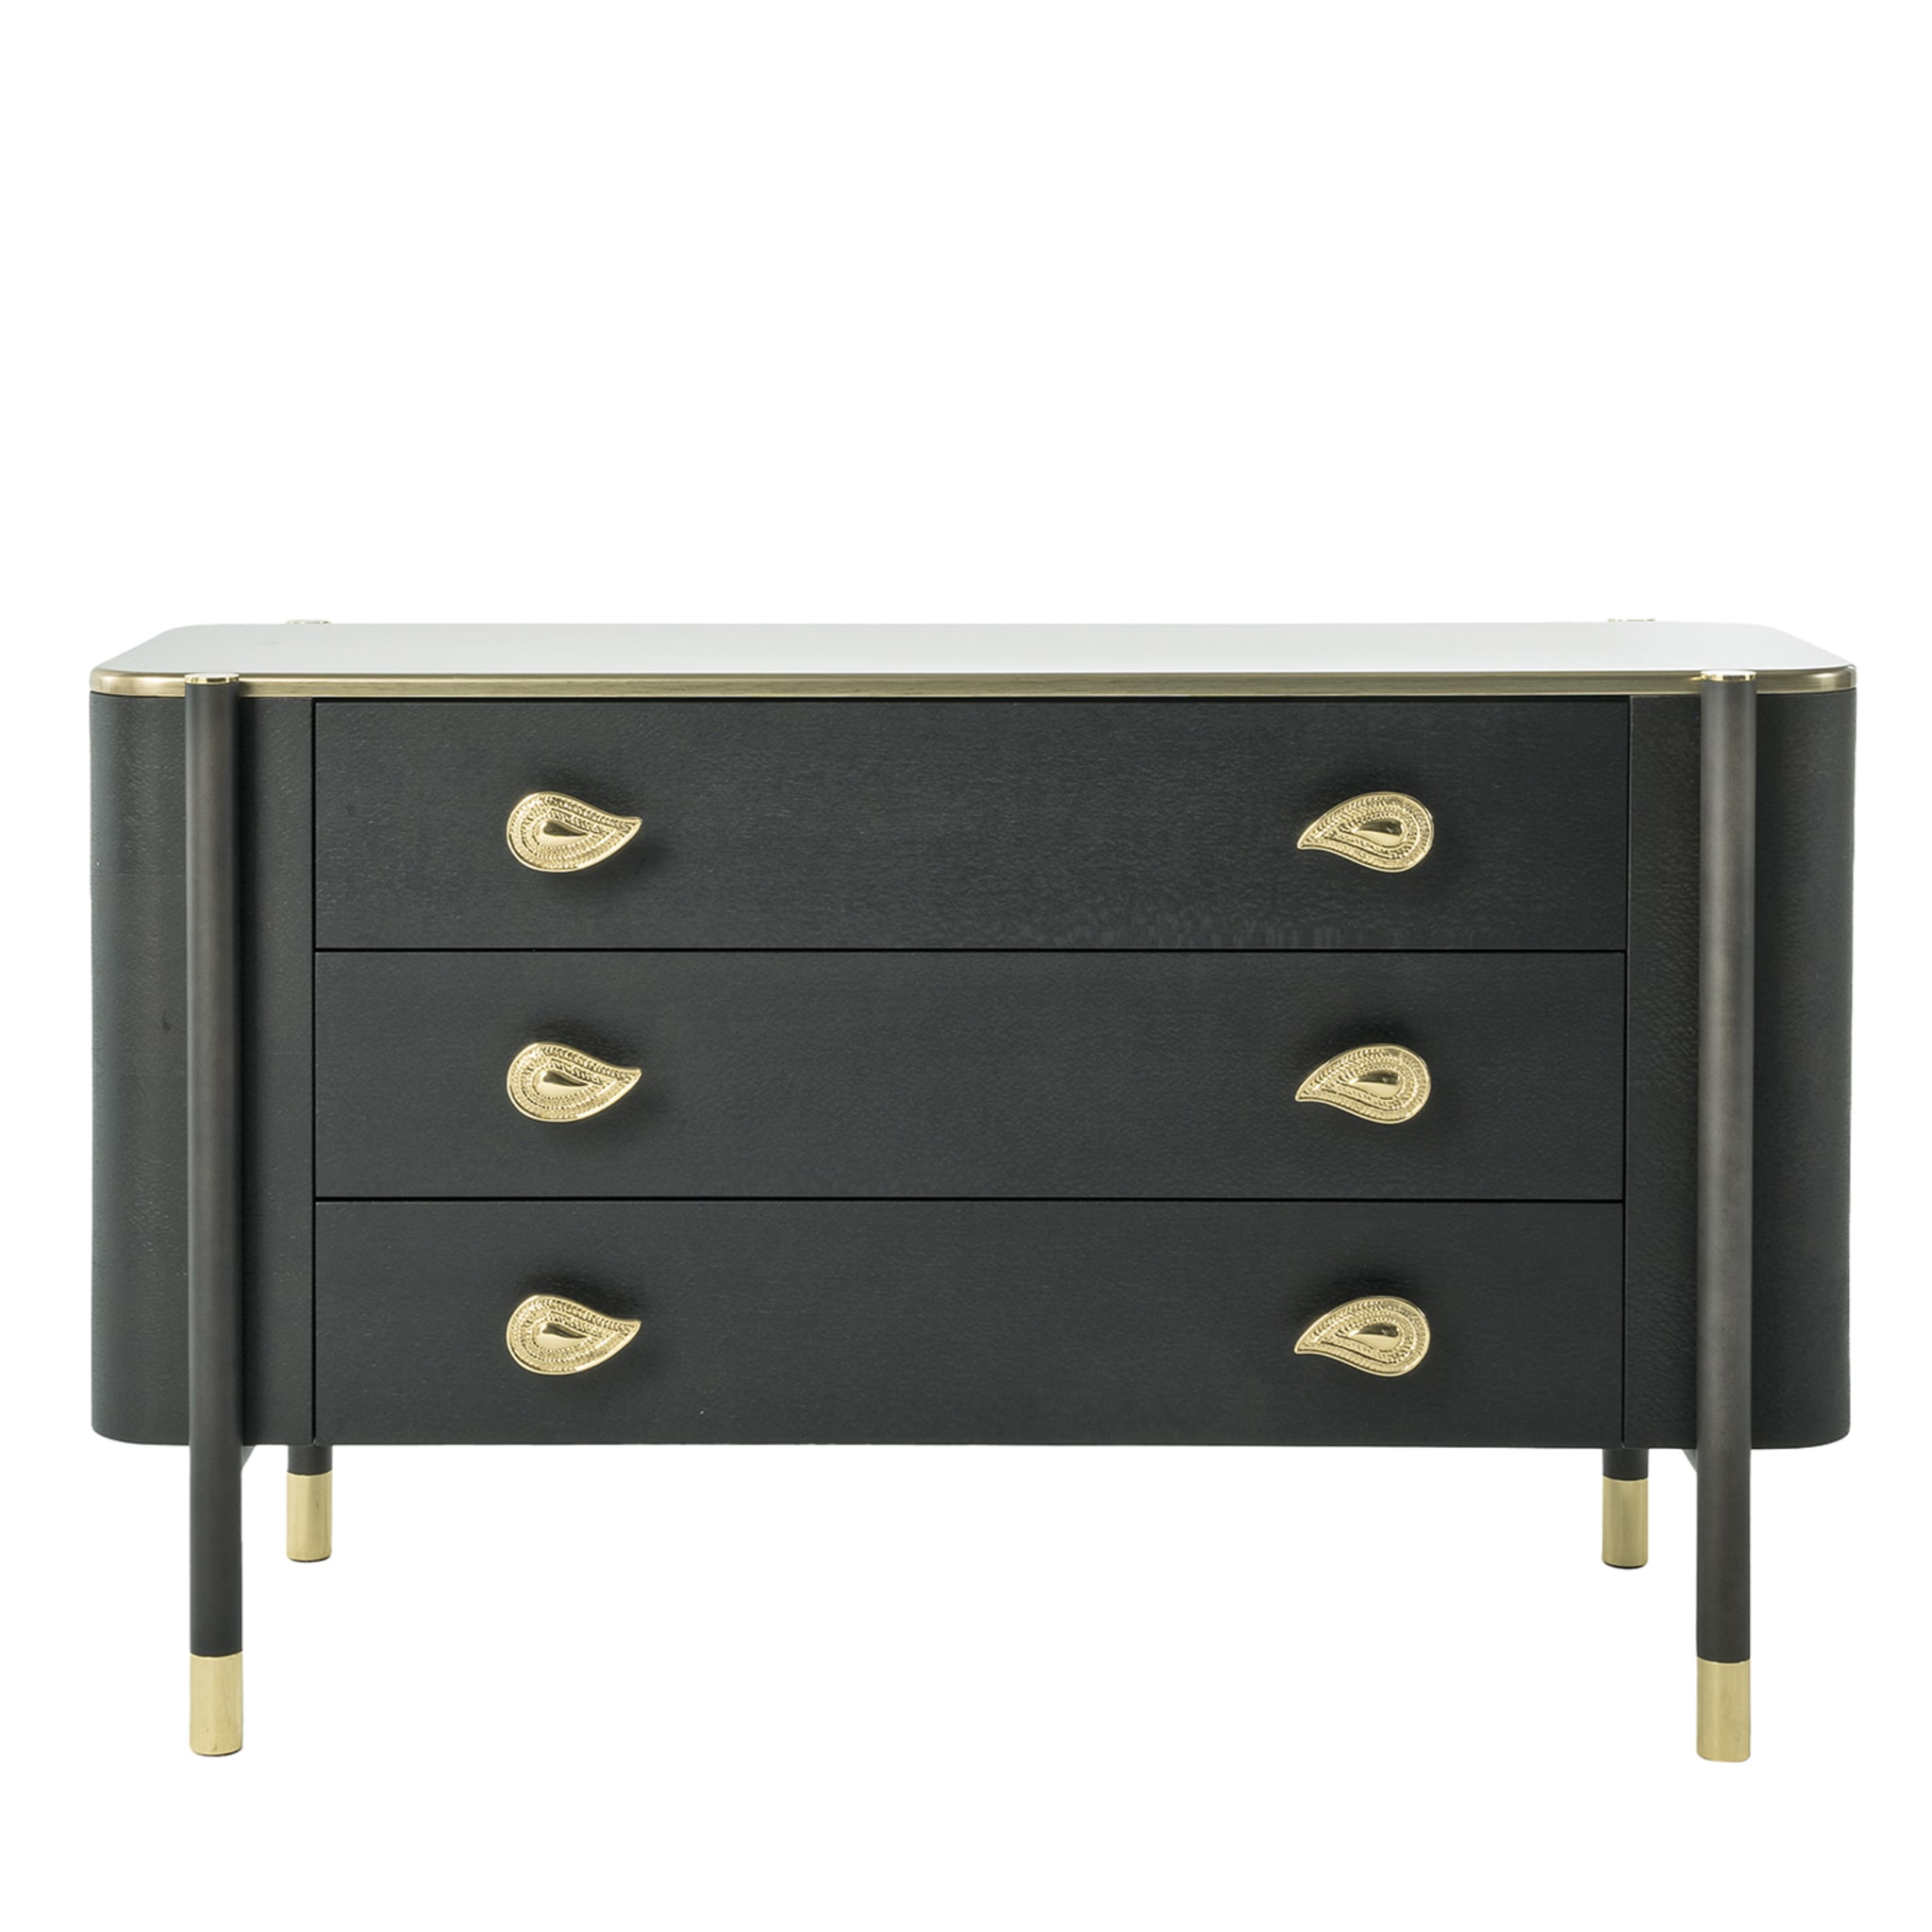 Woodstock Chest of Drawers - Vista principale